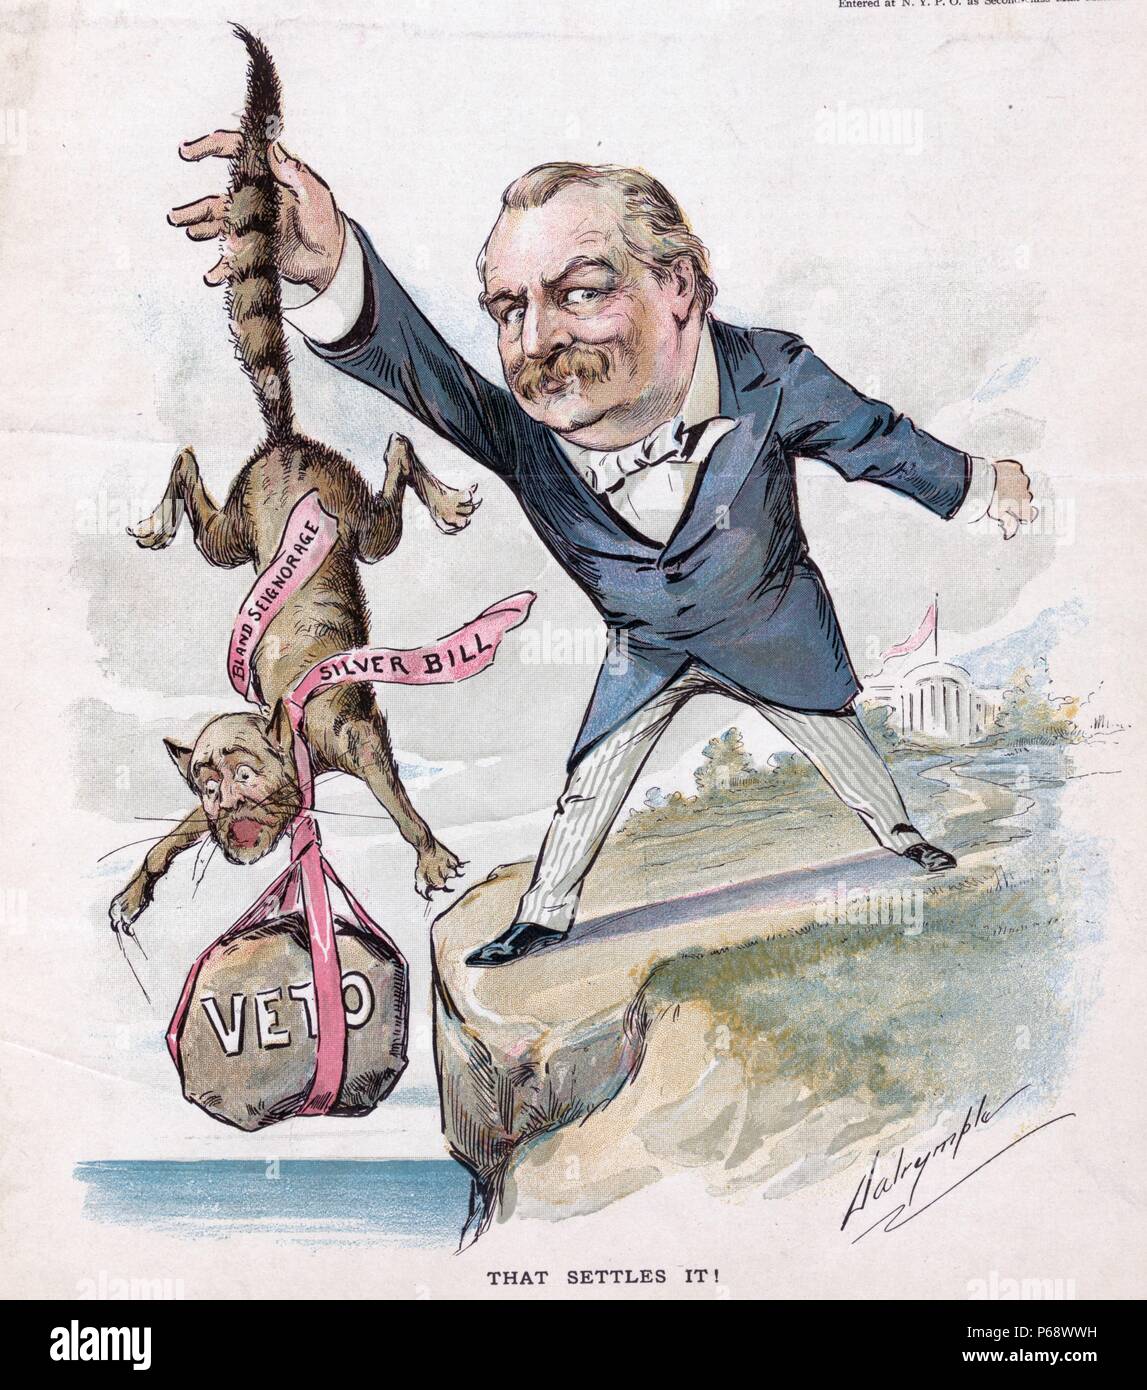 That settles it! 1894 print shows President Cleveland holding a cat by the tail, it has ribbons labelled 'Bland Seignorage Silver Bill'; Cleveland has used the ribbons to tie a rock labelled 'Veto' to the cat, which he drops over a cliff. Stock Photo